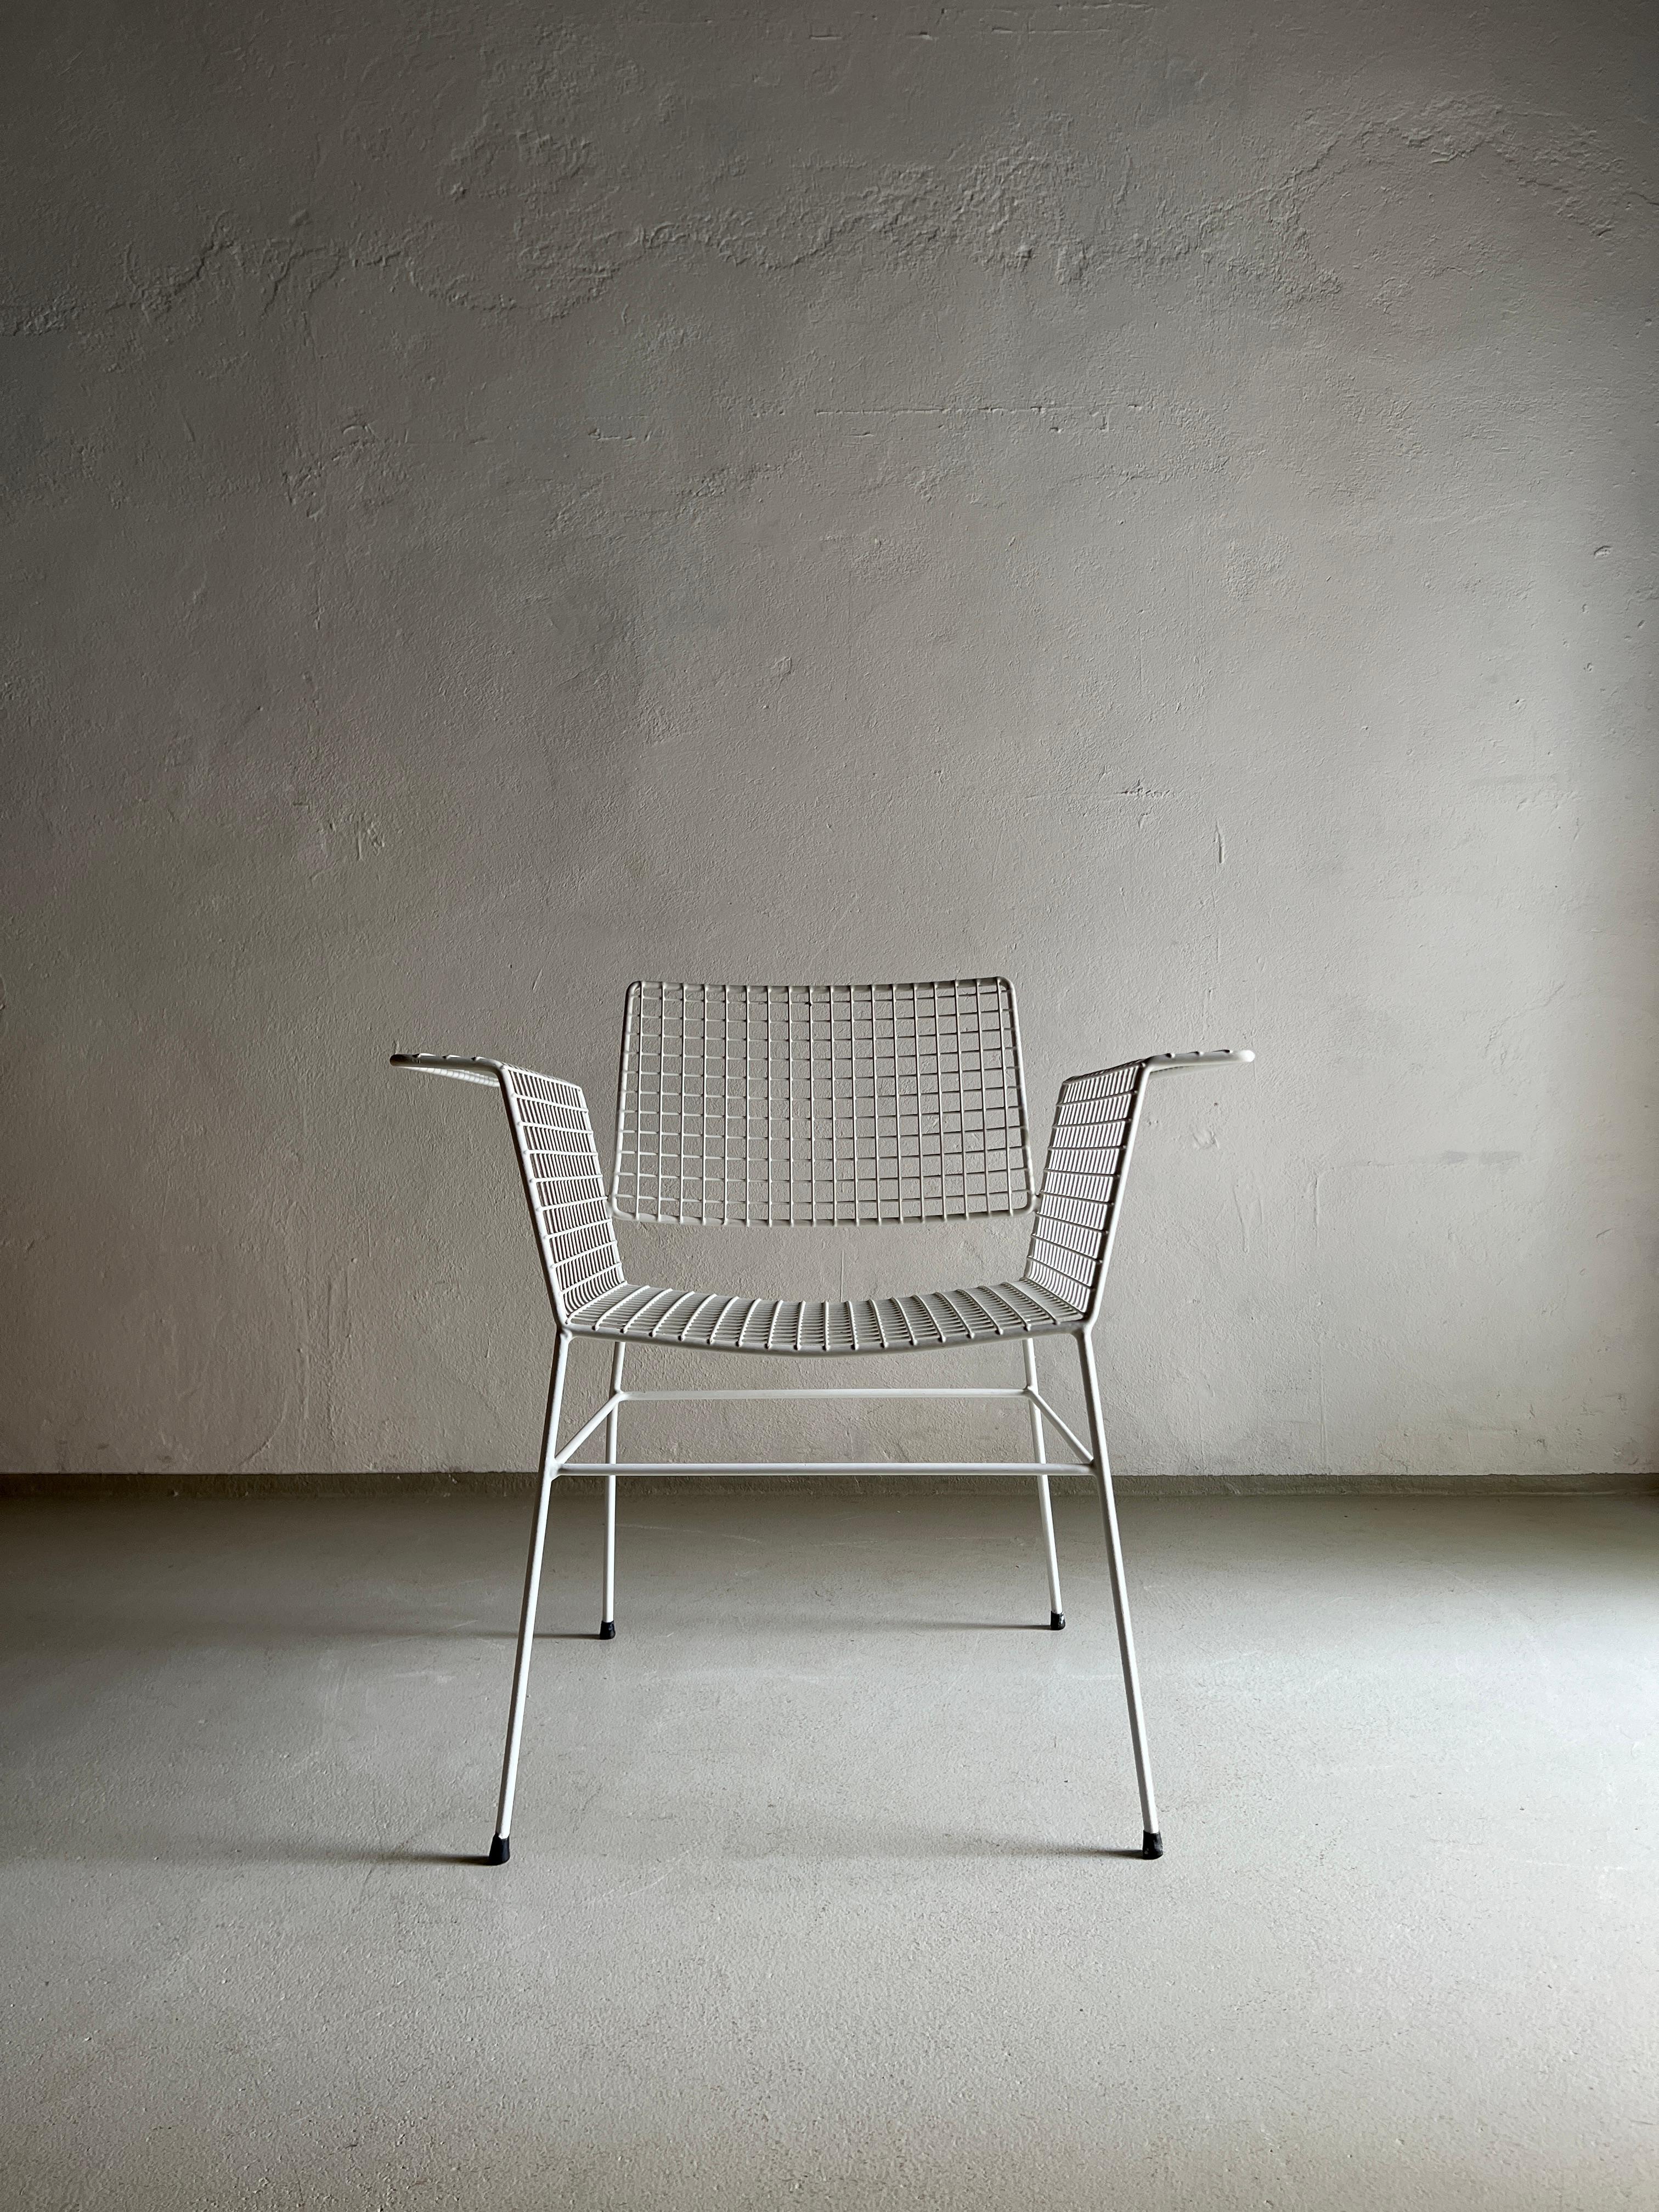 Cold-Painted White Metal Wire Chair from Erlau Germany, 1960s For Sale